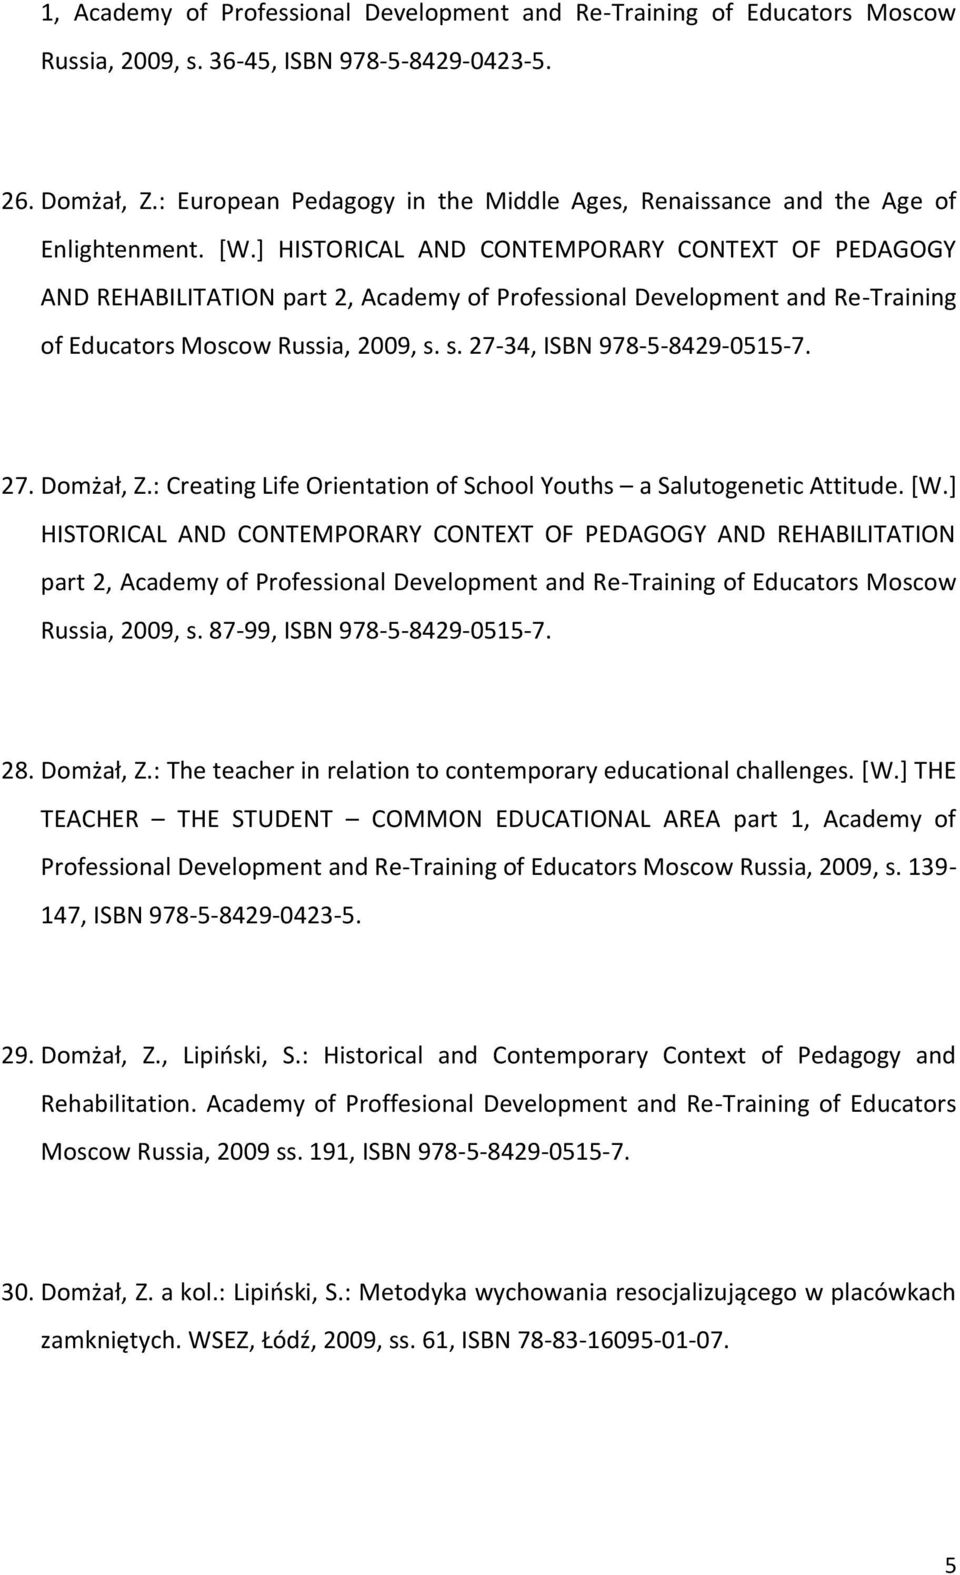 ] HISTORICAL AND CONTEMPORARY CONTEXT OF PEDAGOGY AND REHABILITATION part 2, Academy of Professional Development and Re-Training of Educators Moscow Russia, 2009, s. s. 27-34, ISBN 978-5-8429-0515-7.